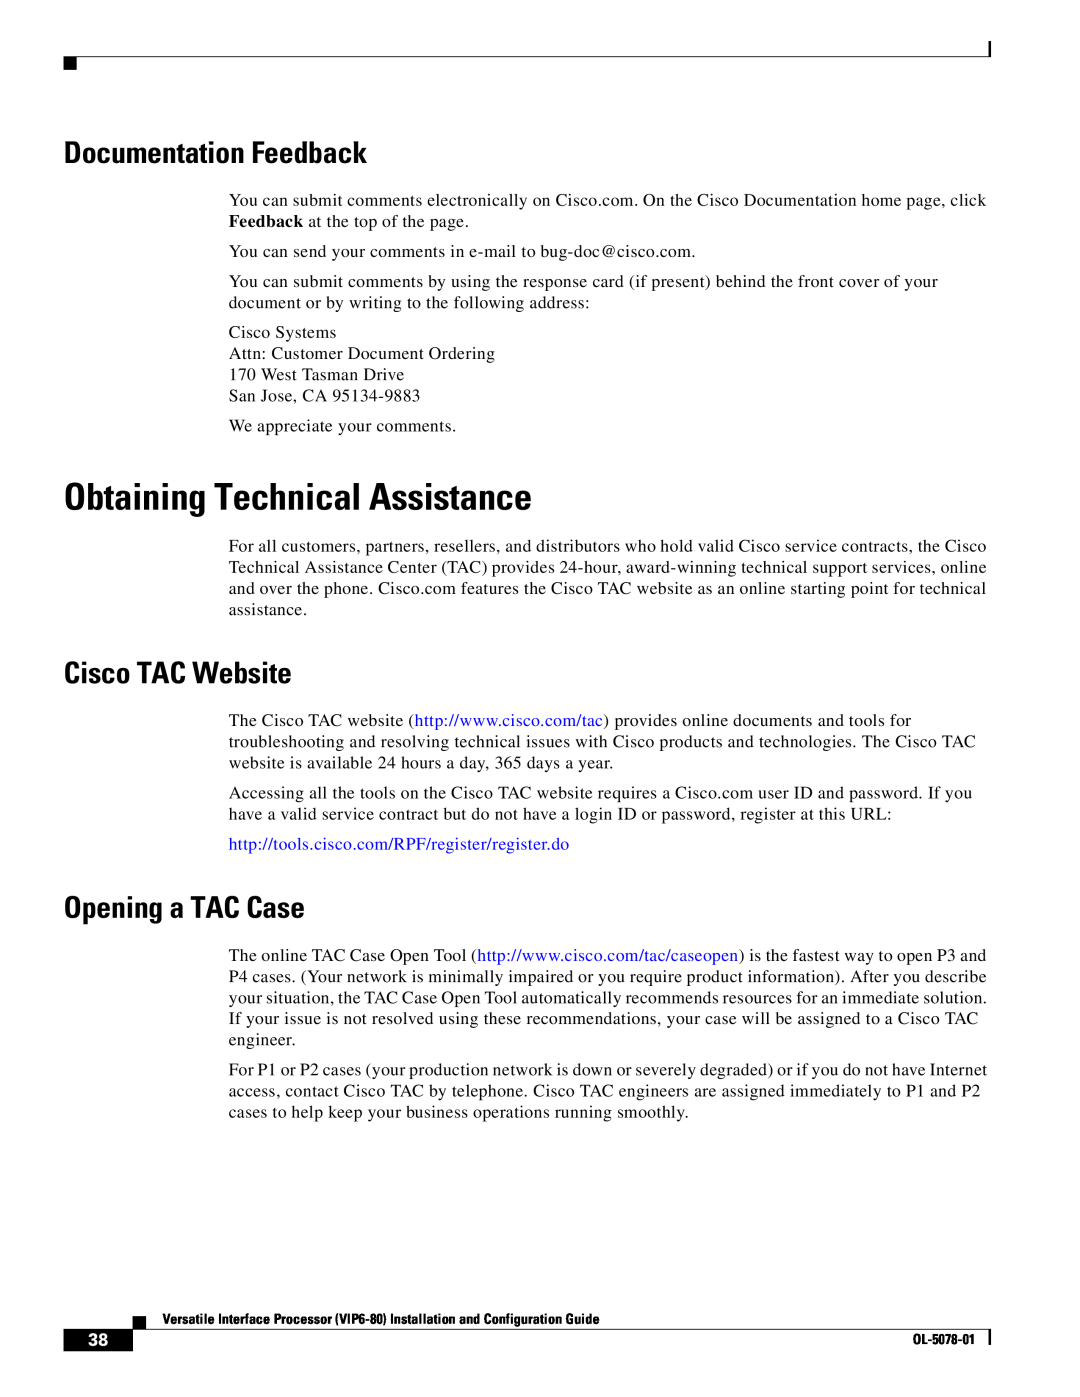 Cisco Systems (VIP6-80) Obtaining Technical Assistance, Documentation Feedback, Cisco TAC Website, Opening a TAC Case 